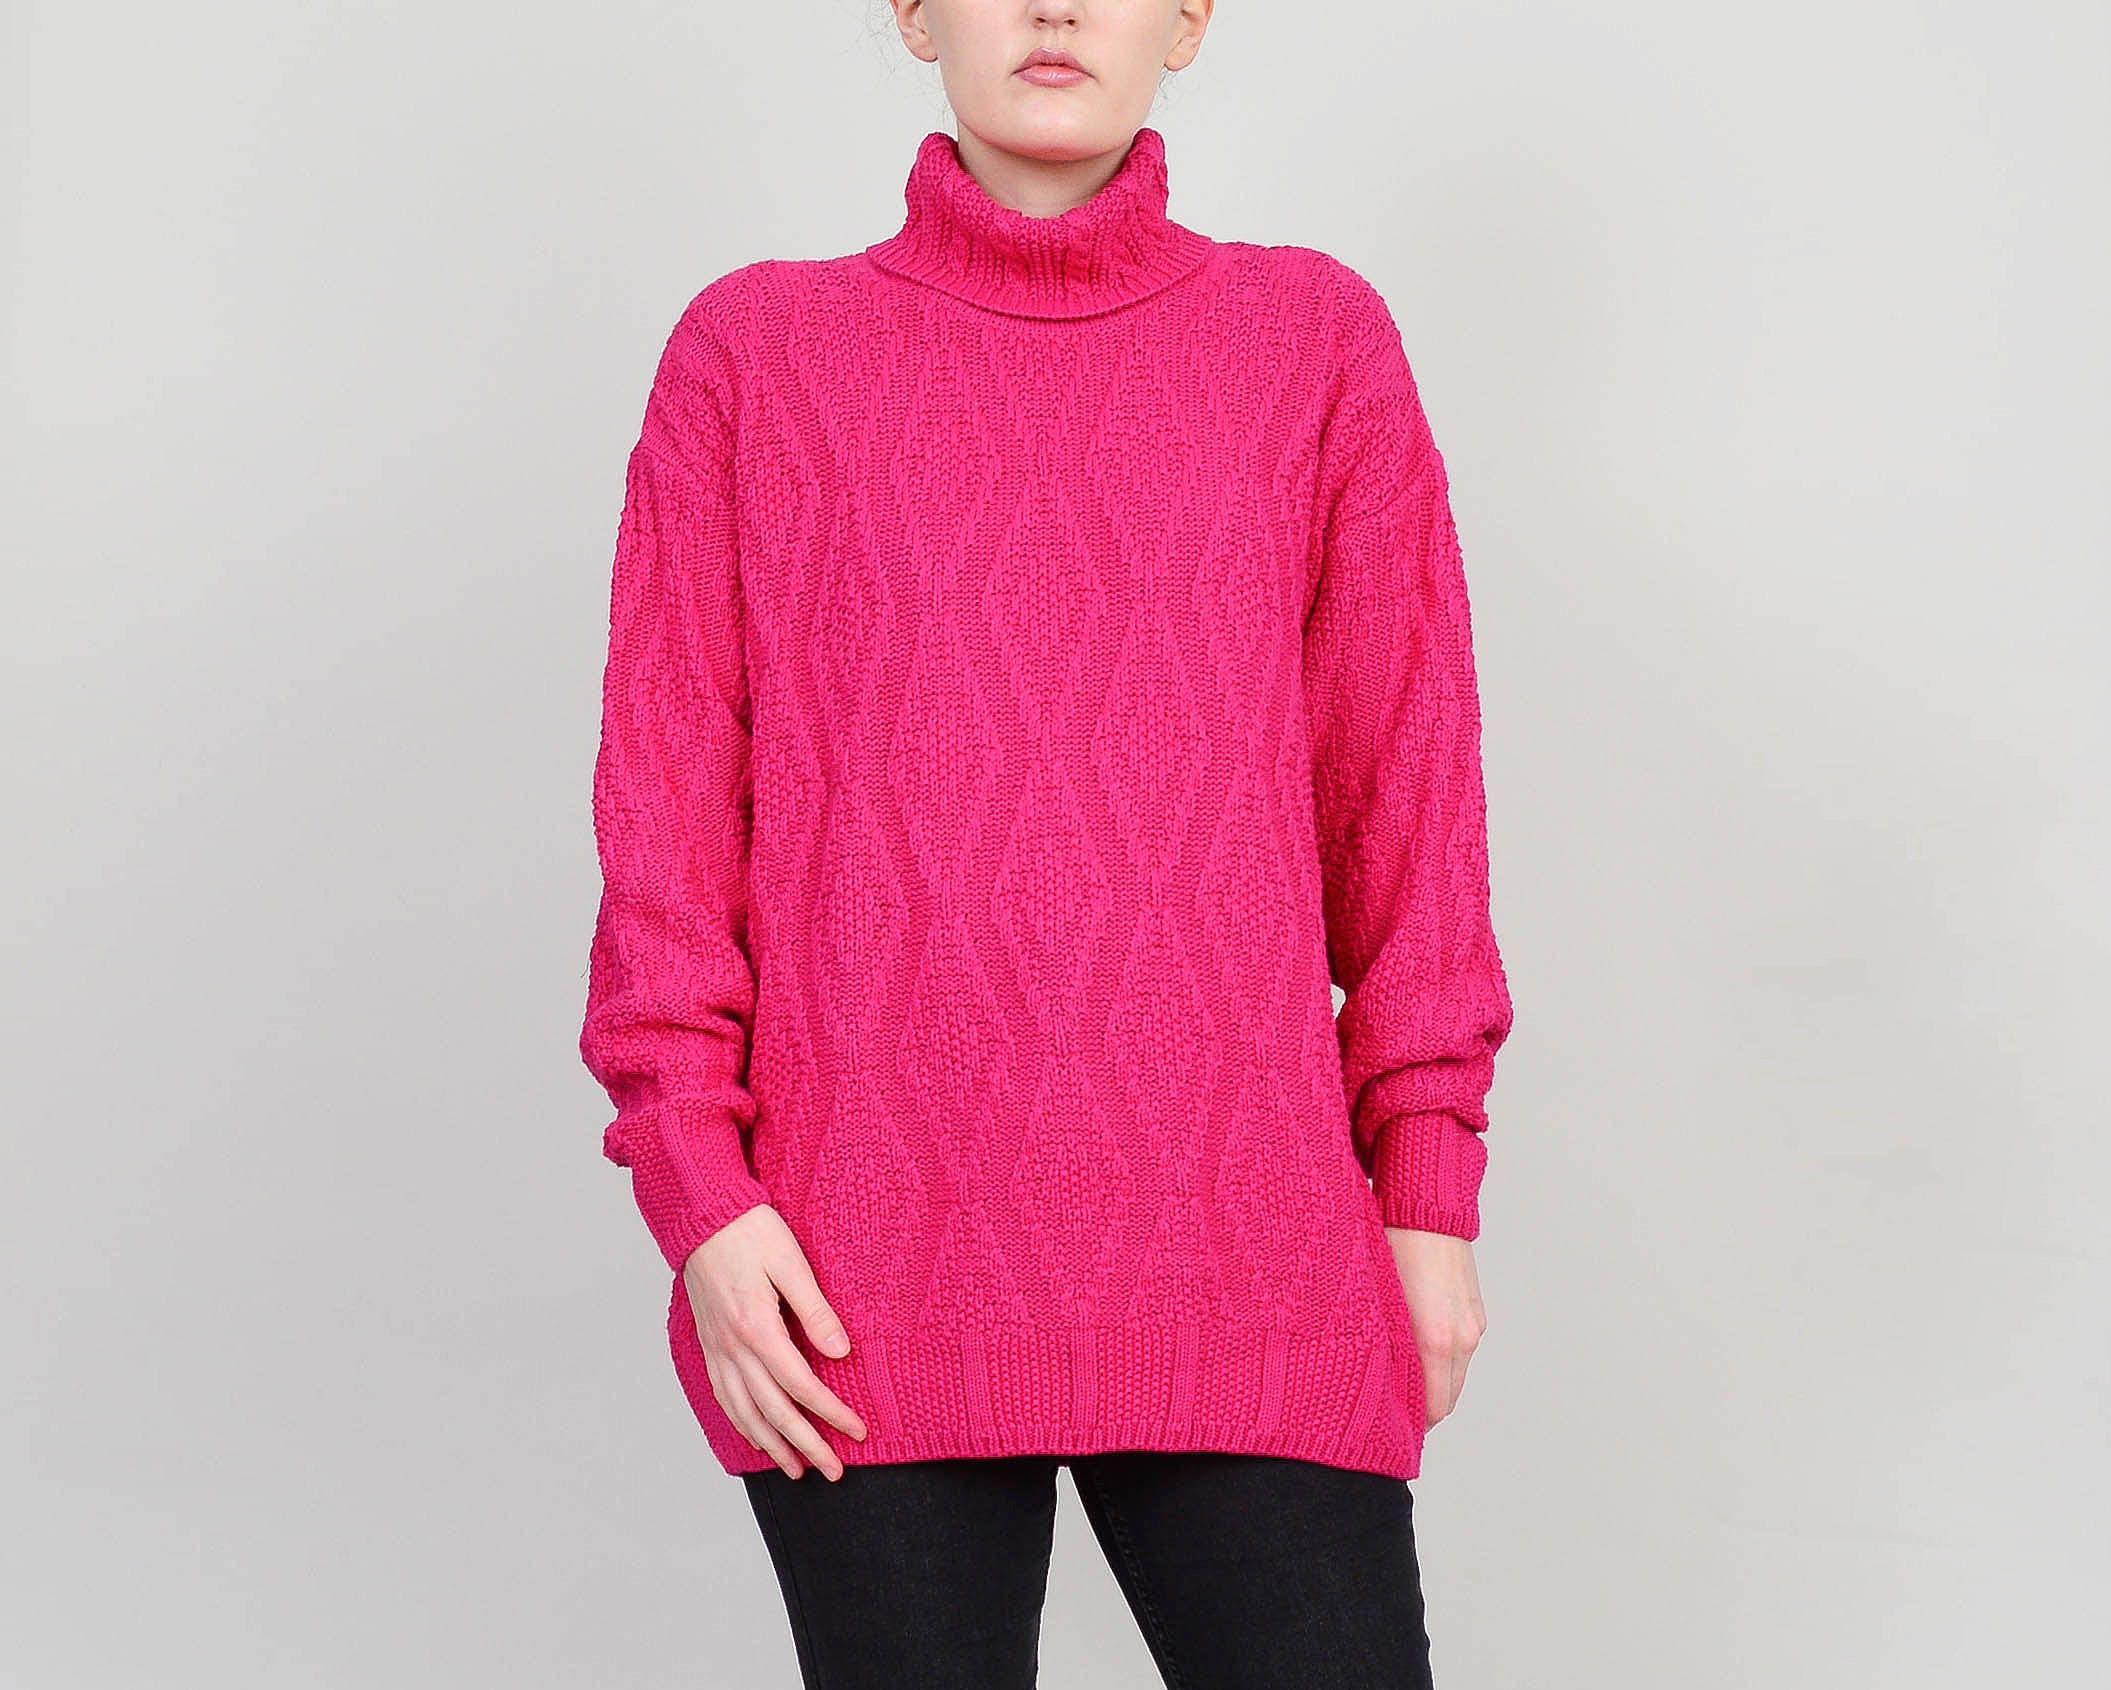 80s Pink Sweater Cotton Cable Knit Turtleneck Sweater